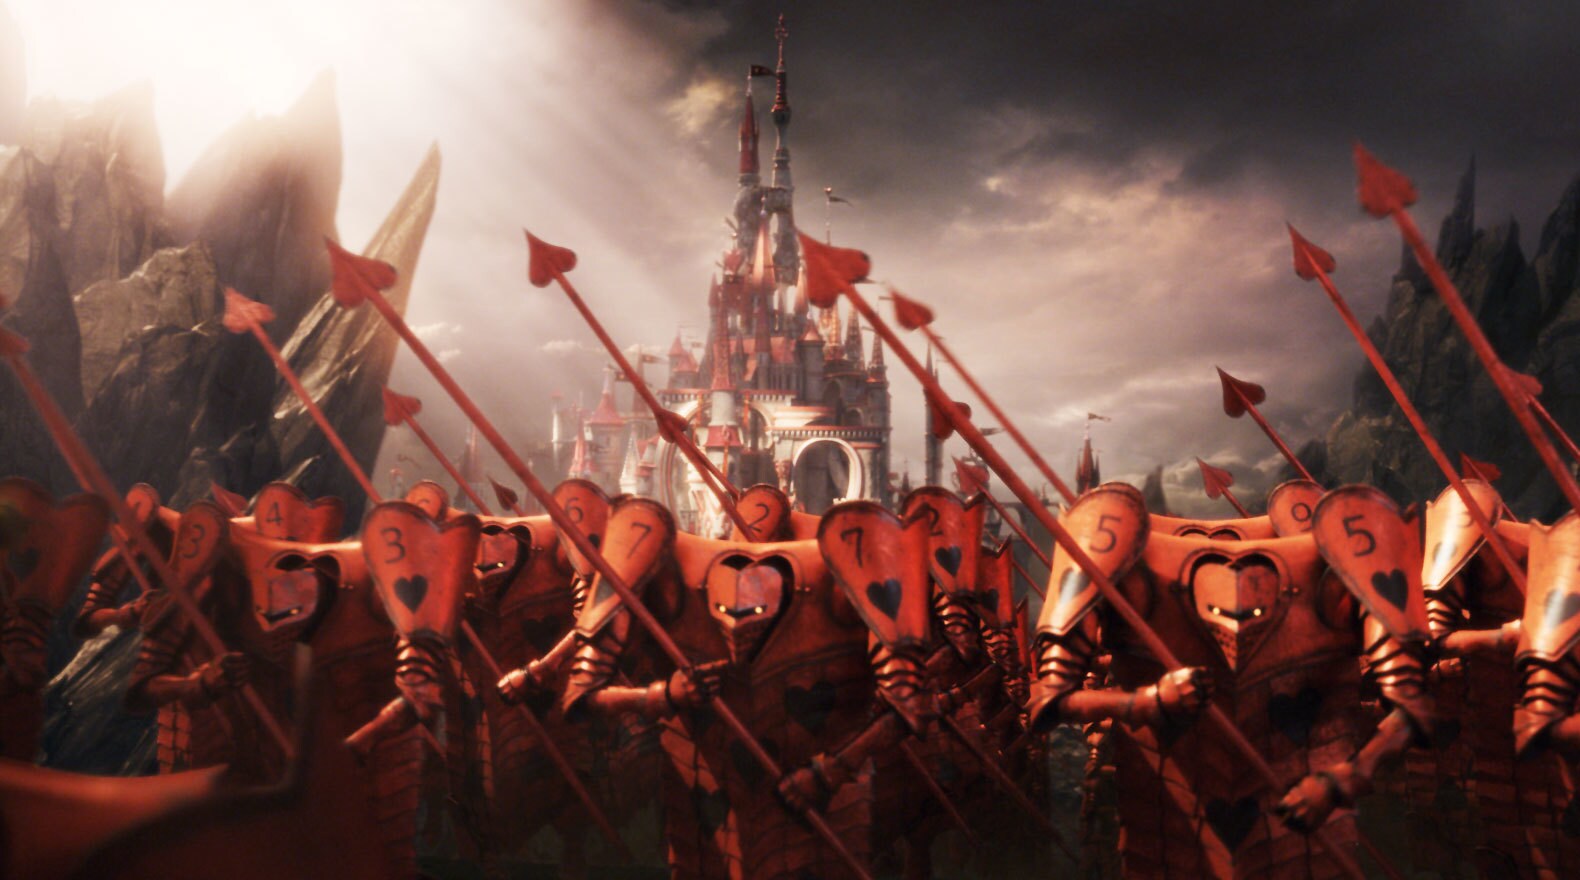 The Red Queen’s forces advance at the gates of the White Queen’s castle.